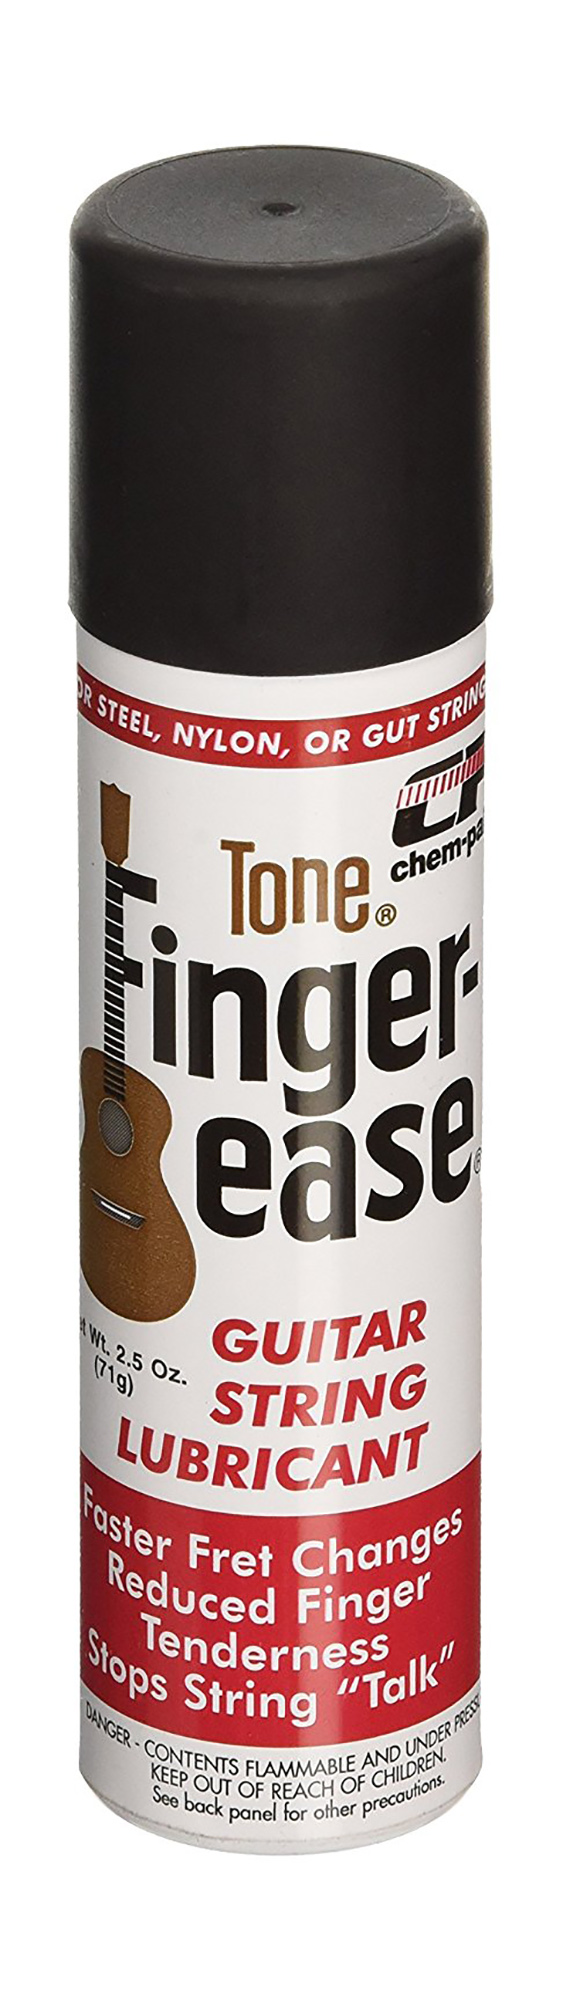 2-PACK Tone Finger-Ease Guitar String Lubricant - Play Faster!